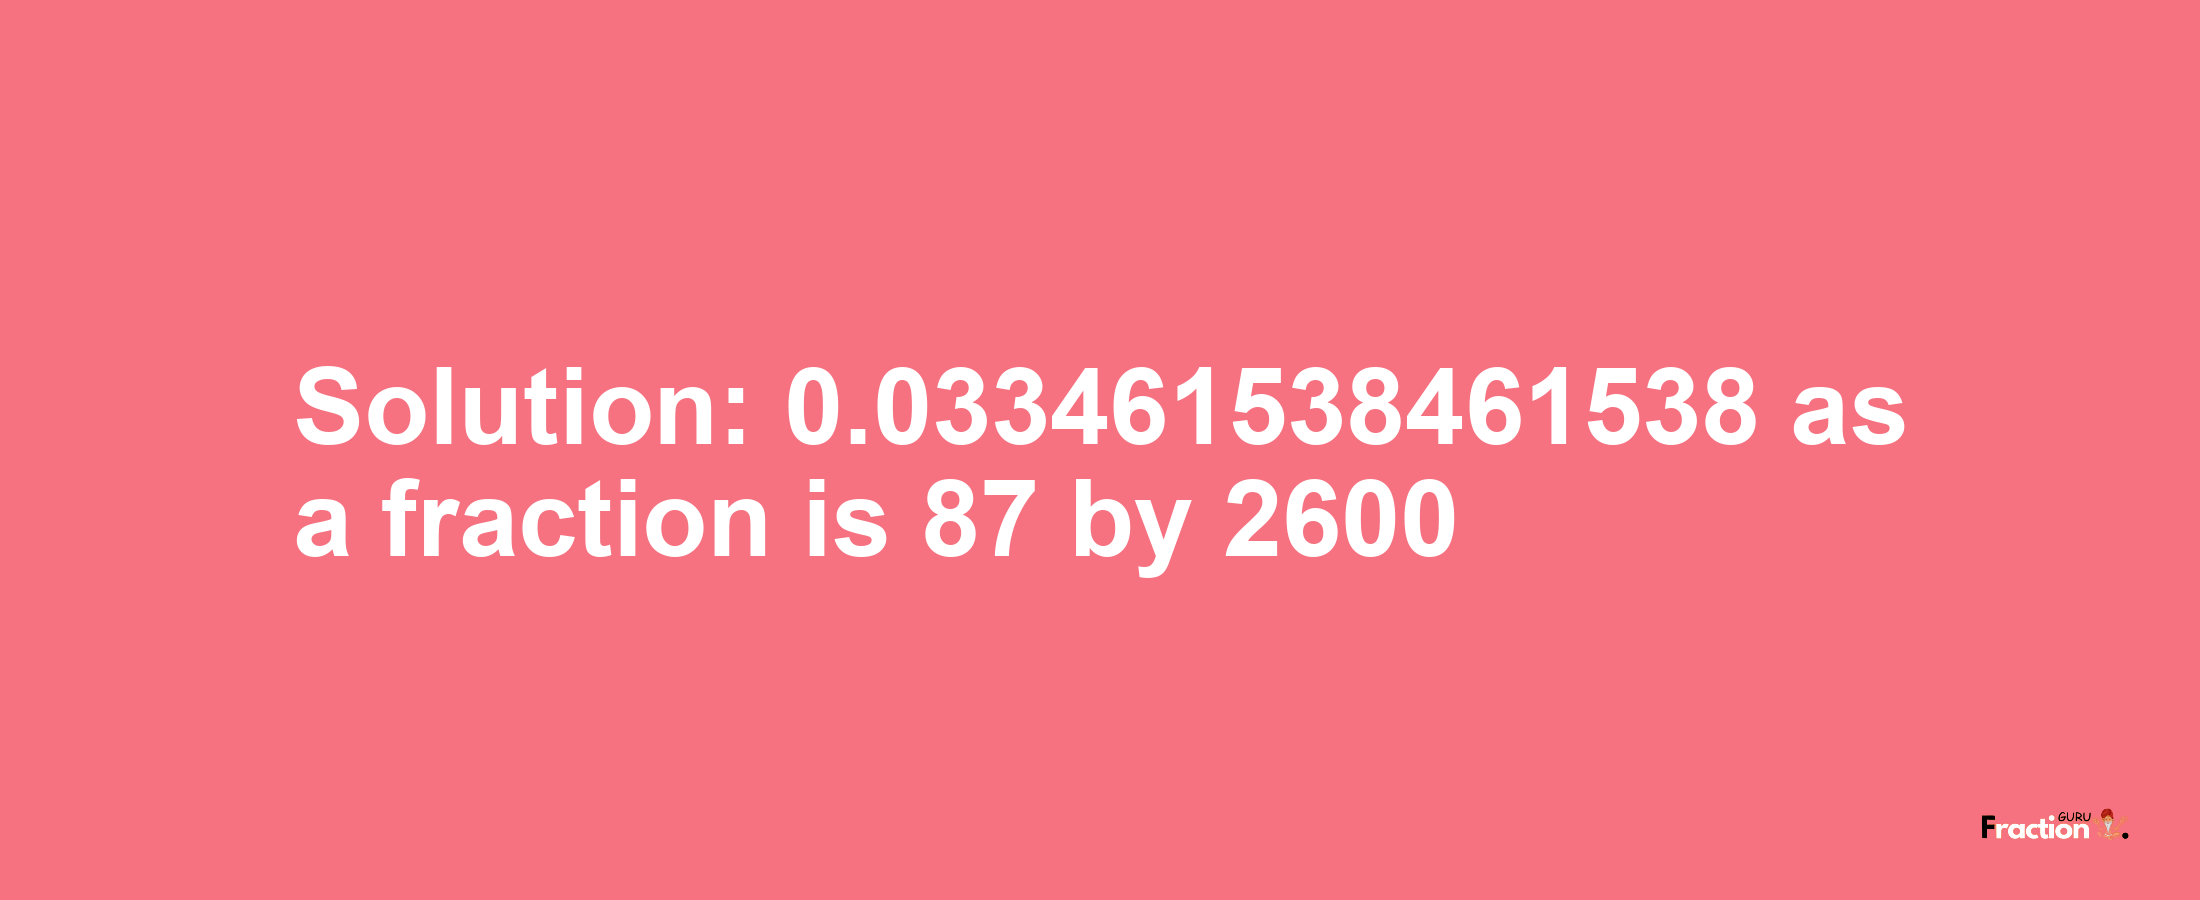 Solution:0.033461538461538 as a fraction is 87/2600